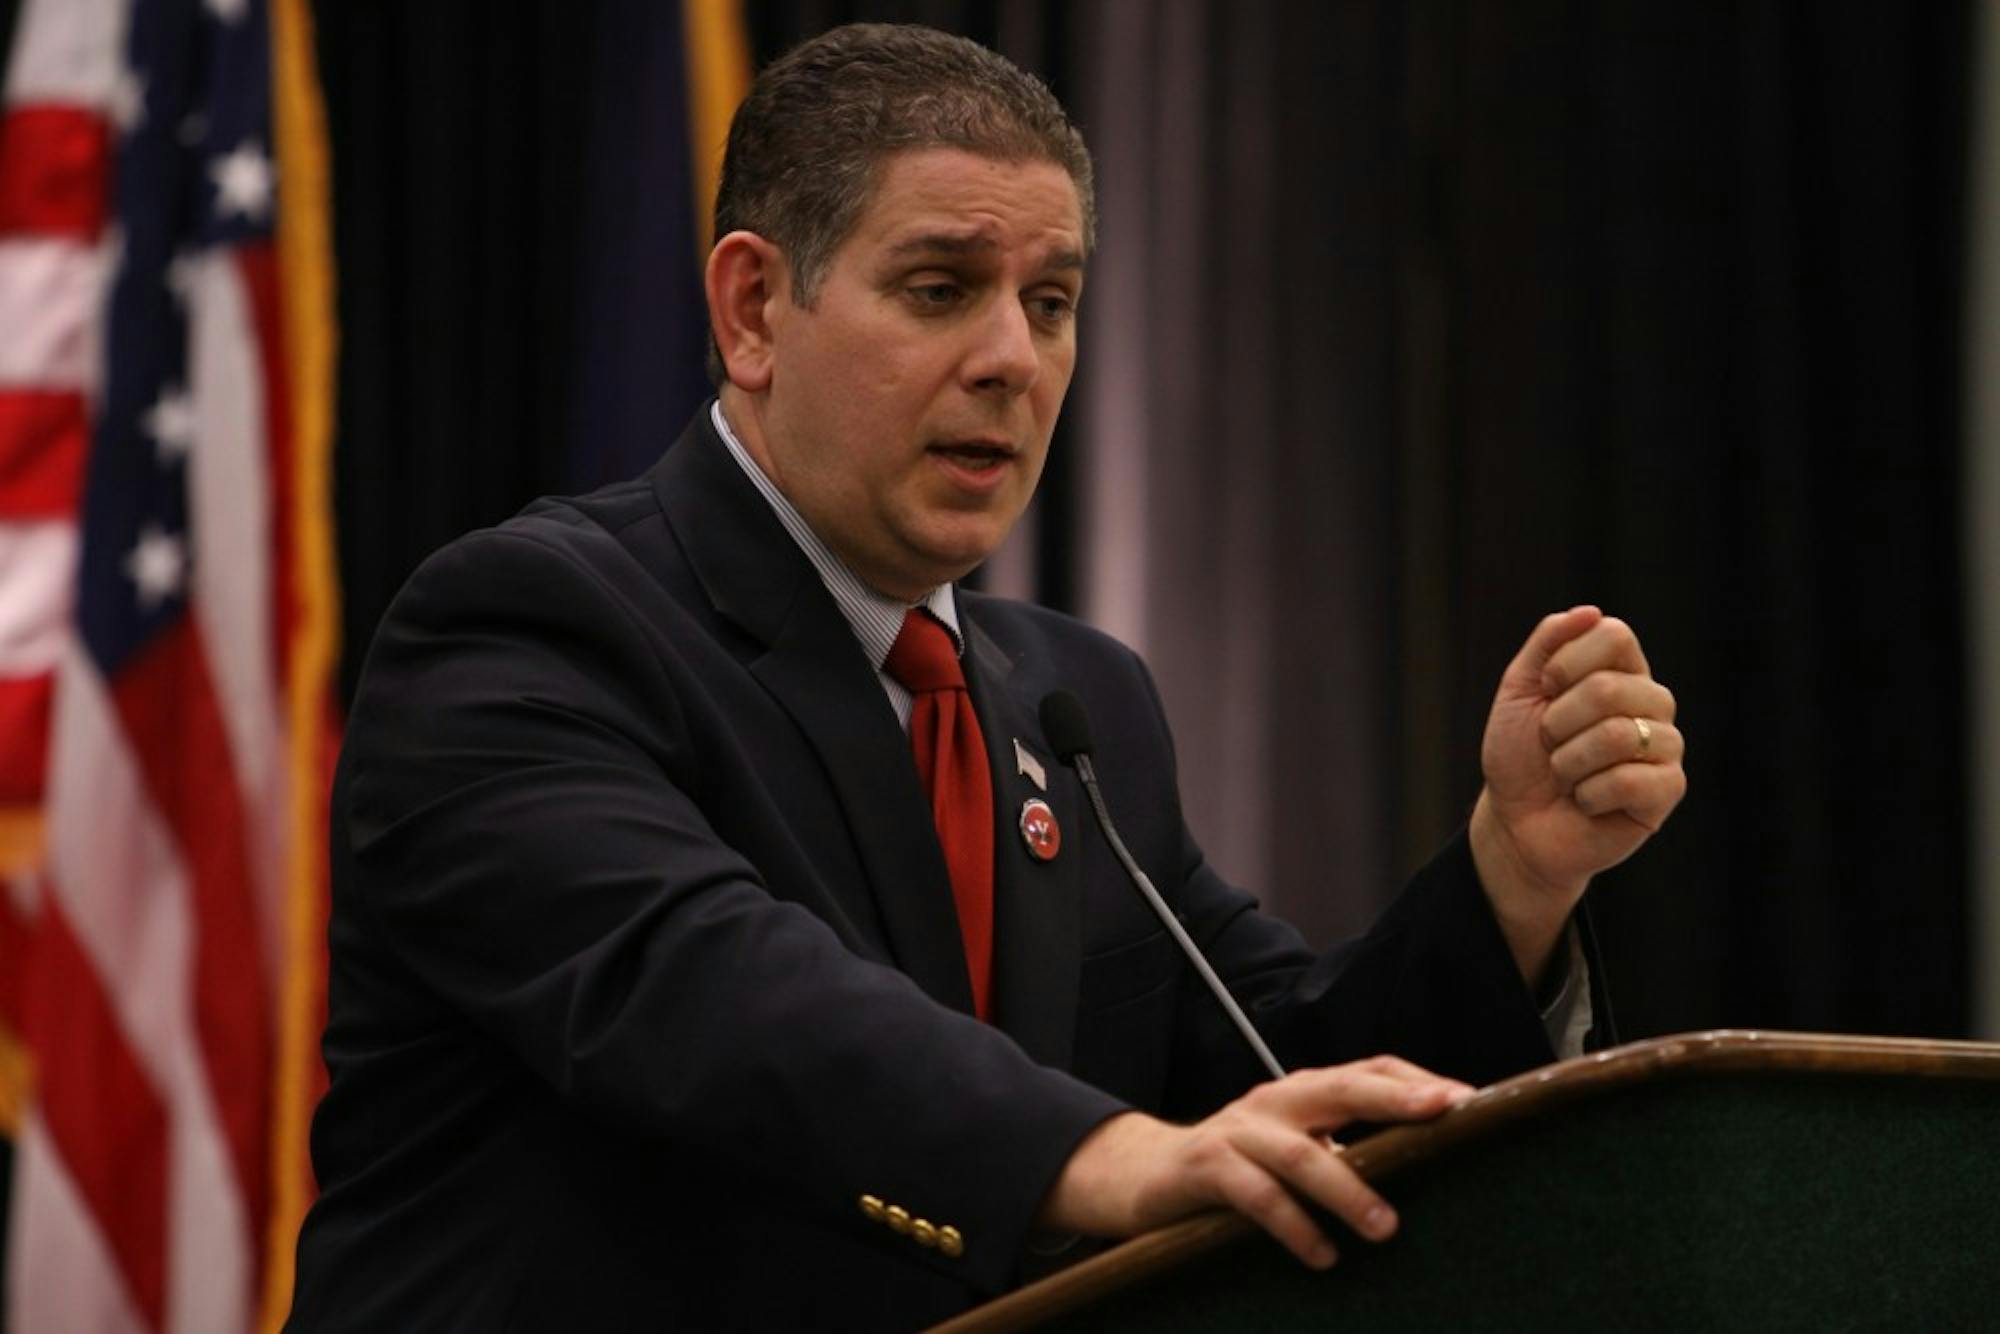 	Democratic gubernatorial candidate, Virg Bernero, visted campus Monday. The meeting included his take on higher education, the economy and environment.